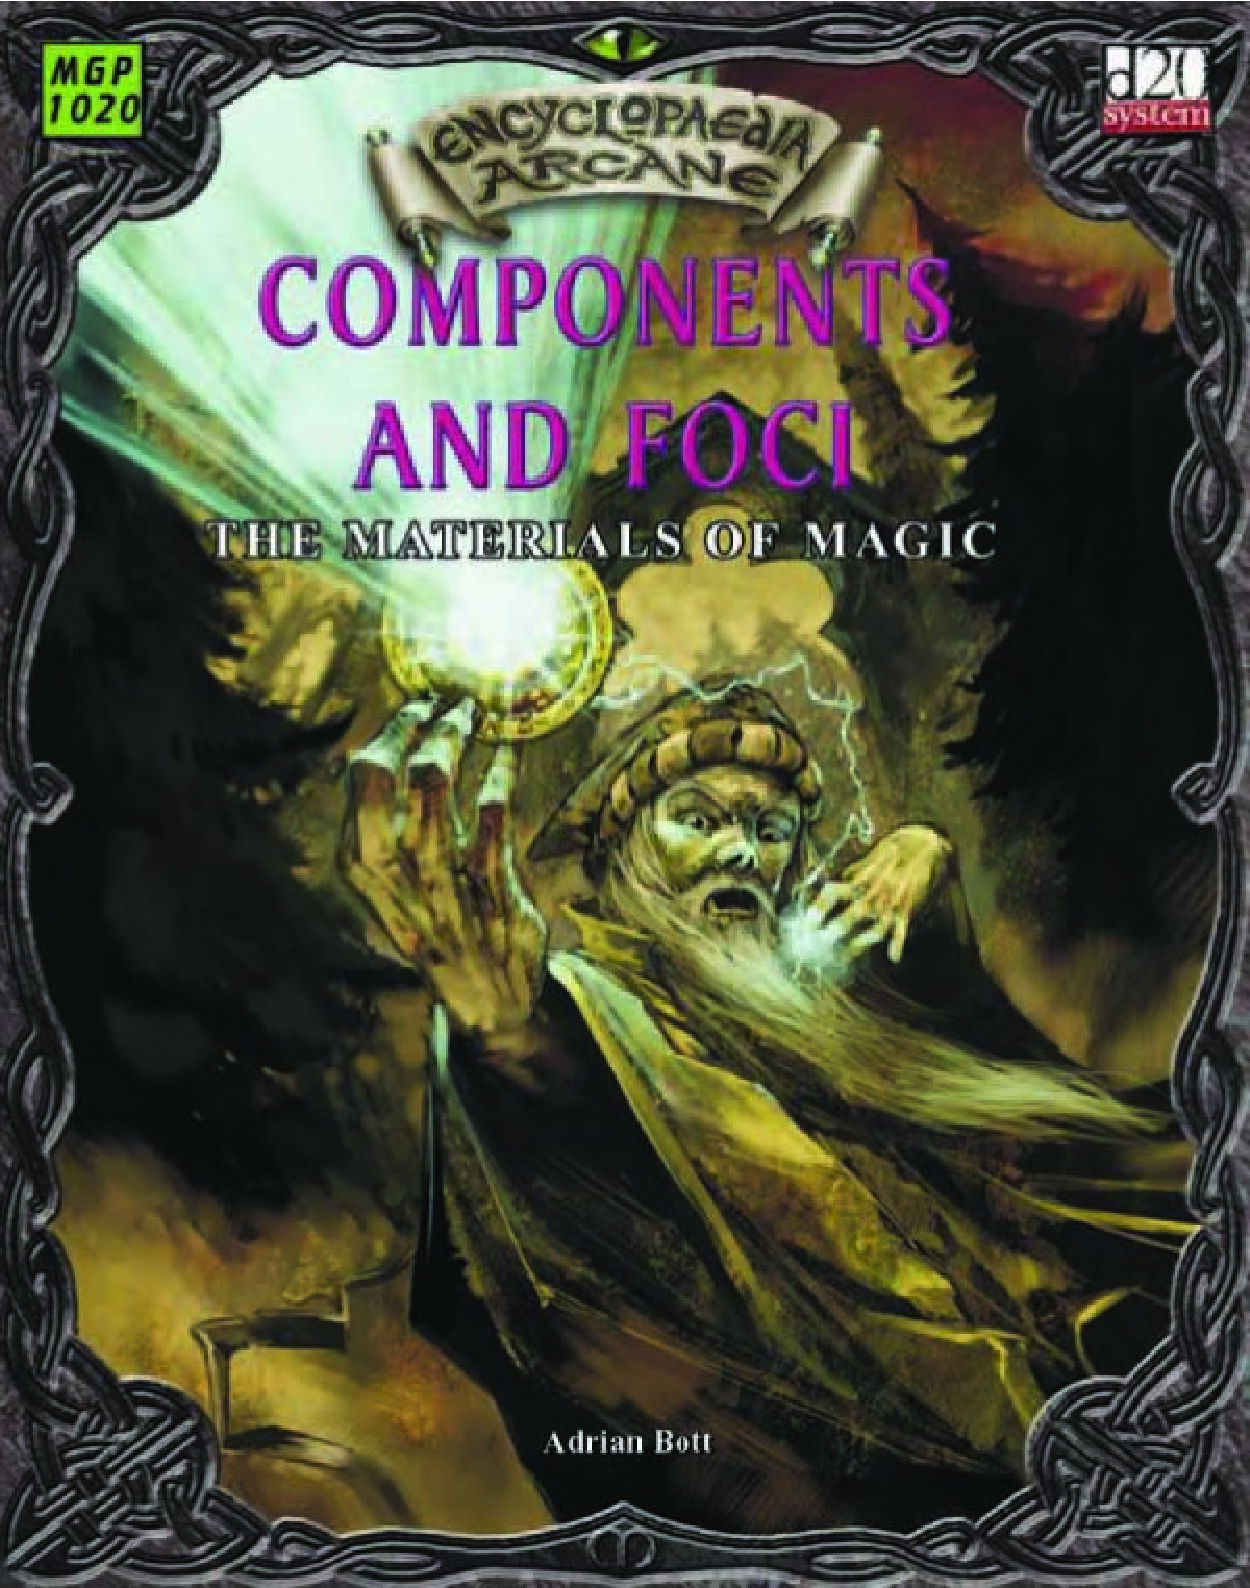 Components And Foci. The Materials Of Magic